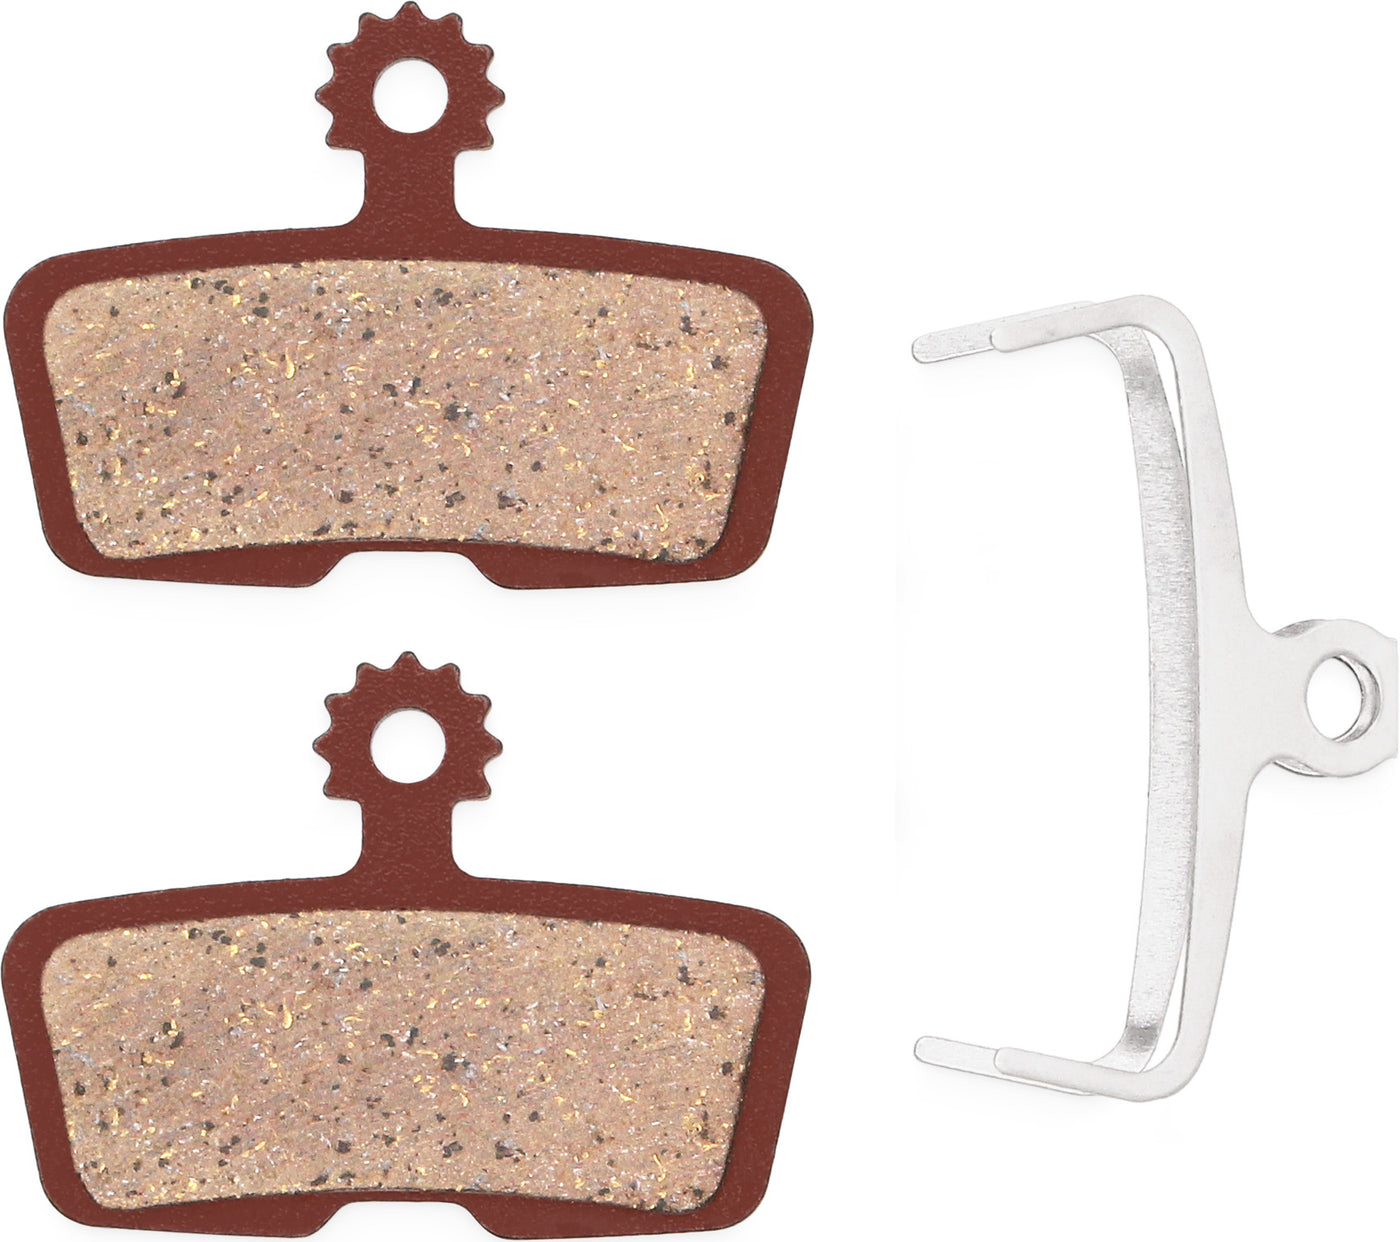 Frictive FR215R Resin Pads for SRAM Code | also Guide Re | Organic | Disc Brake Pads